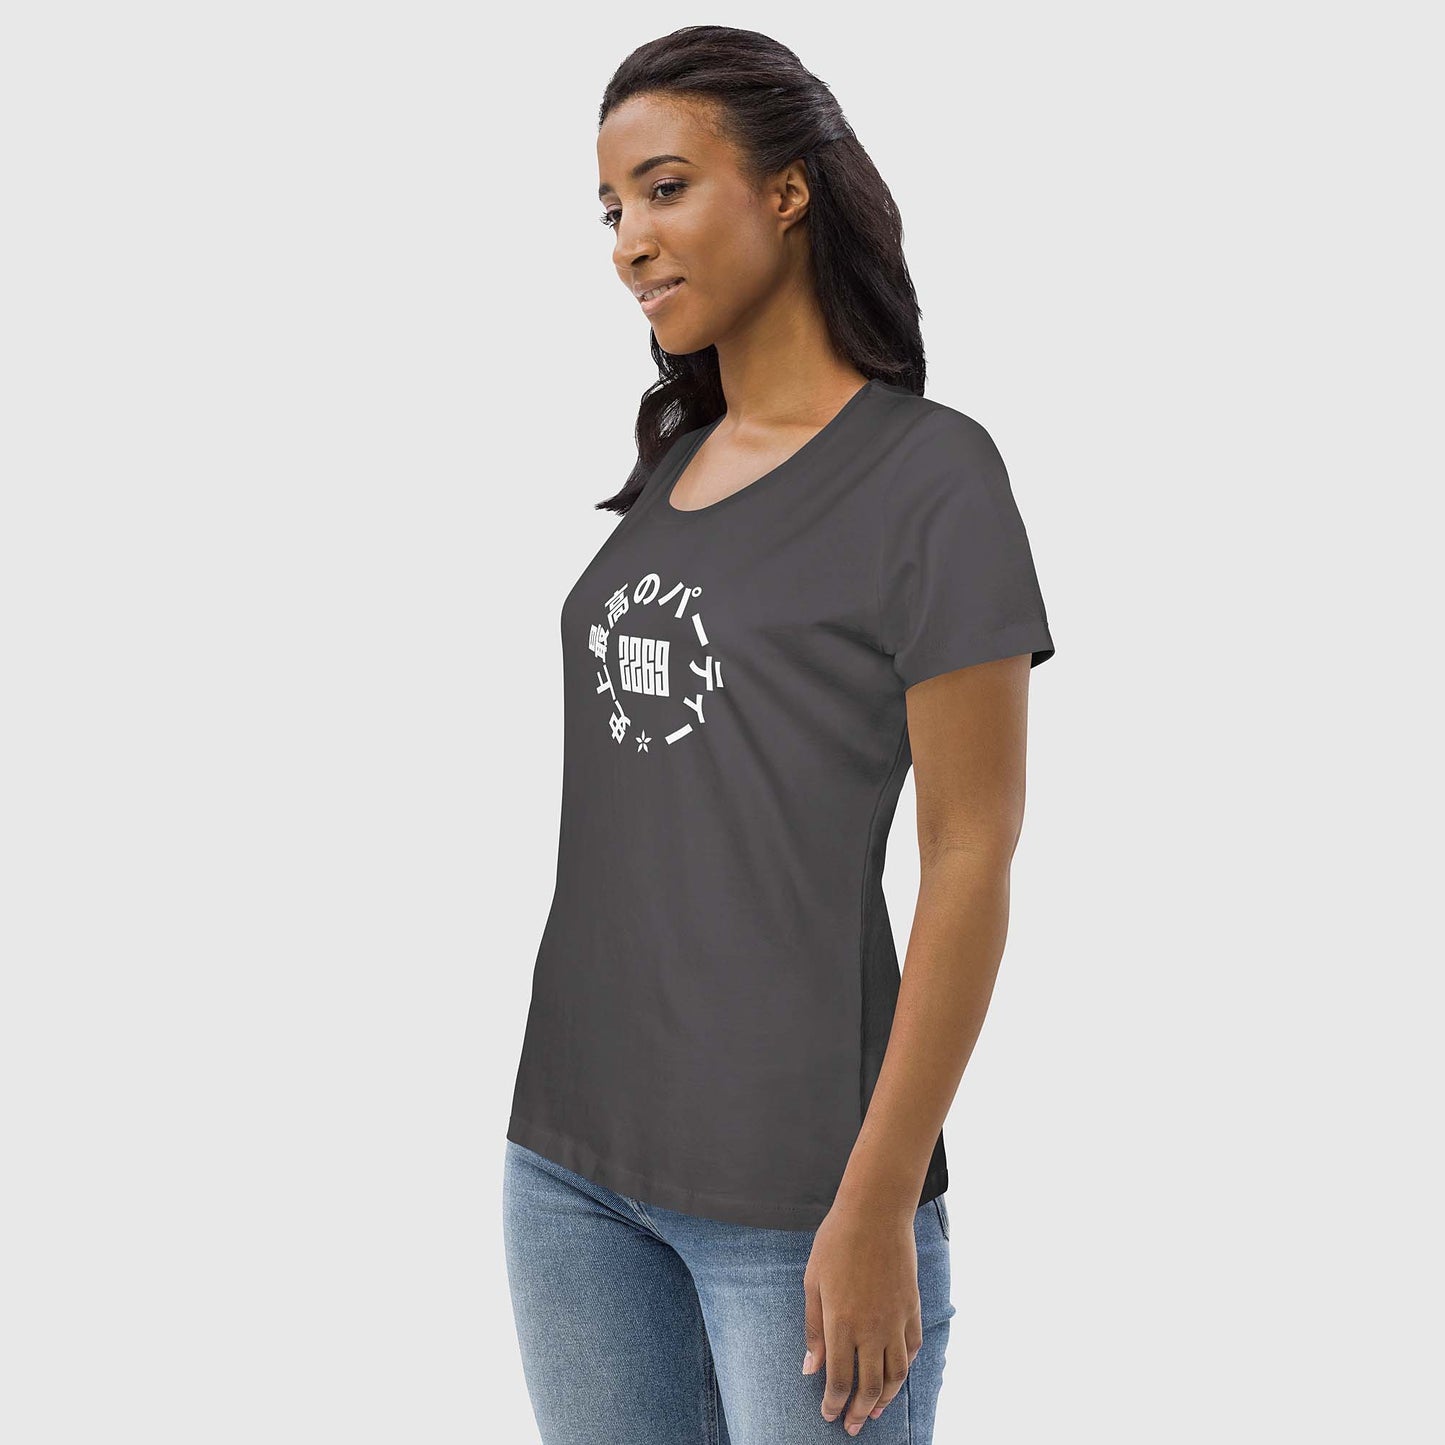 Women's anthracite fitted organic cotton t-shirt with Japanese 2269 party circle